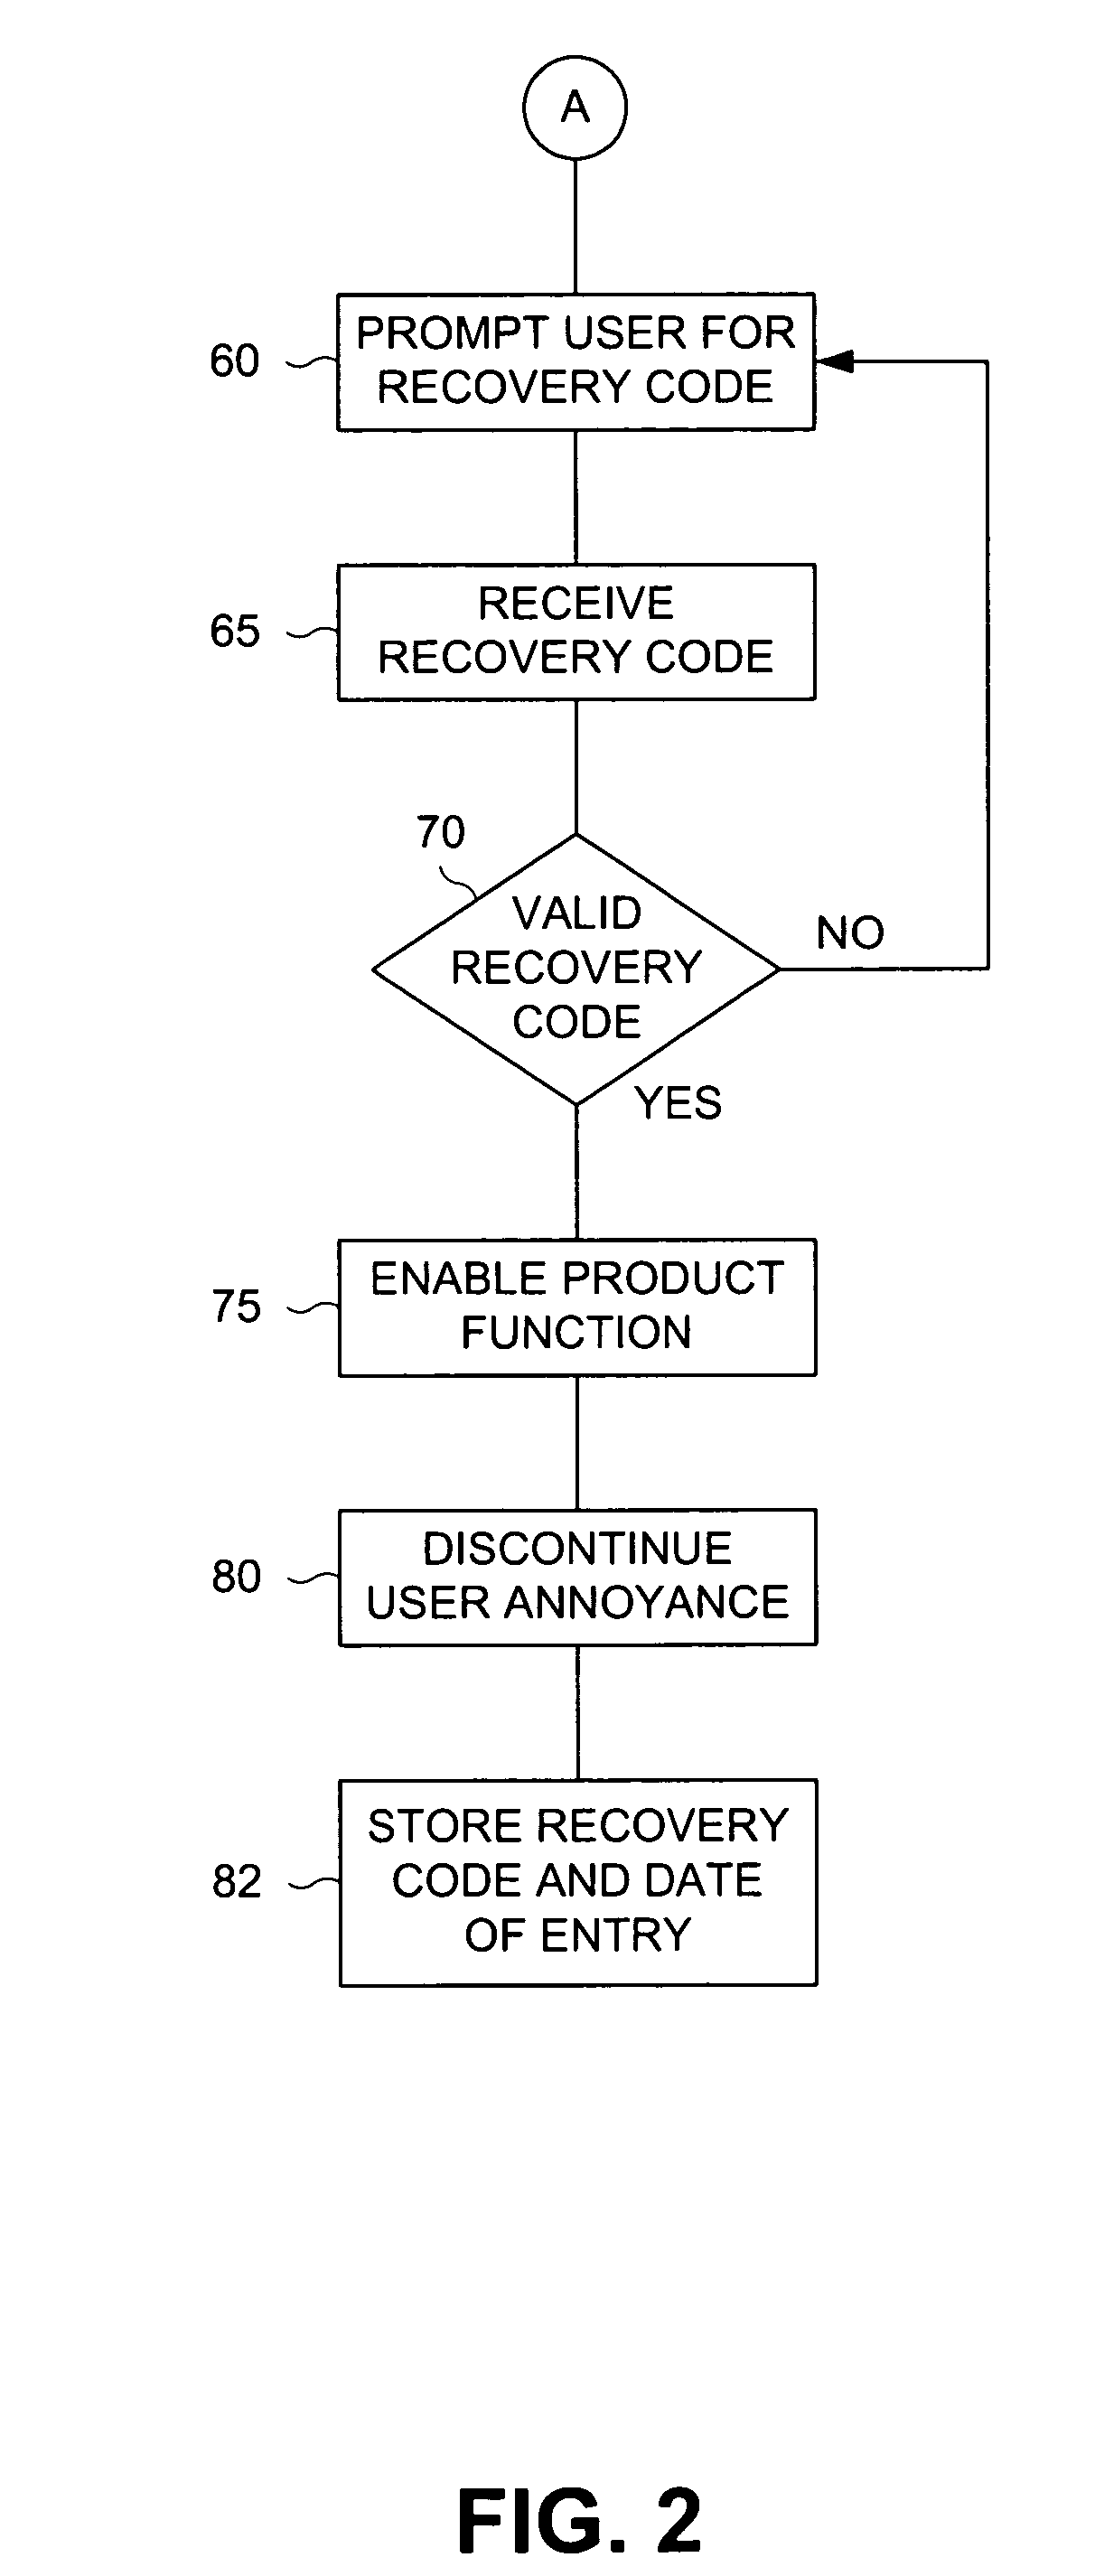 Method and apparatus for product-centric delivery of product user notices